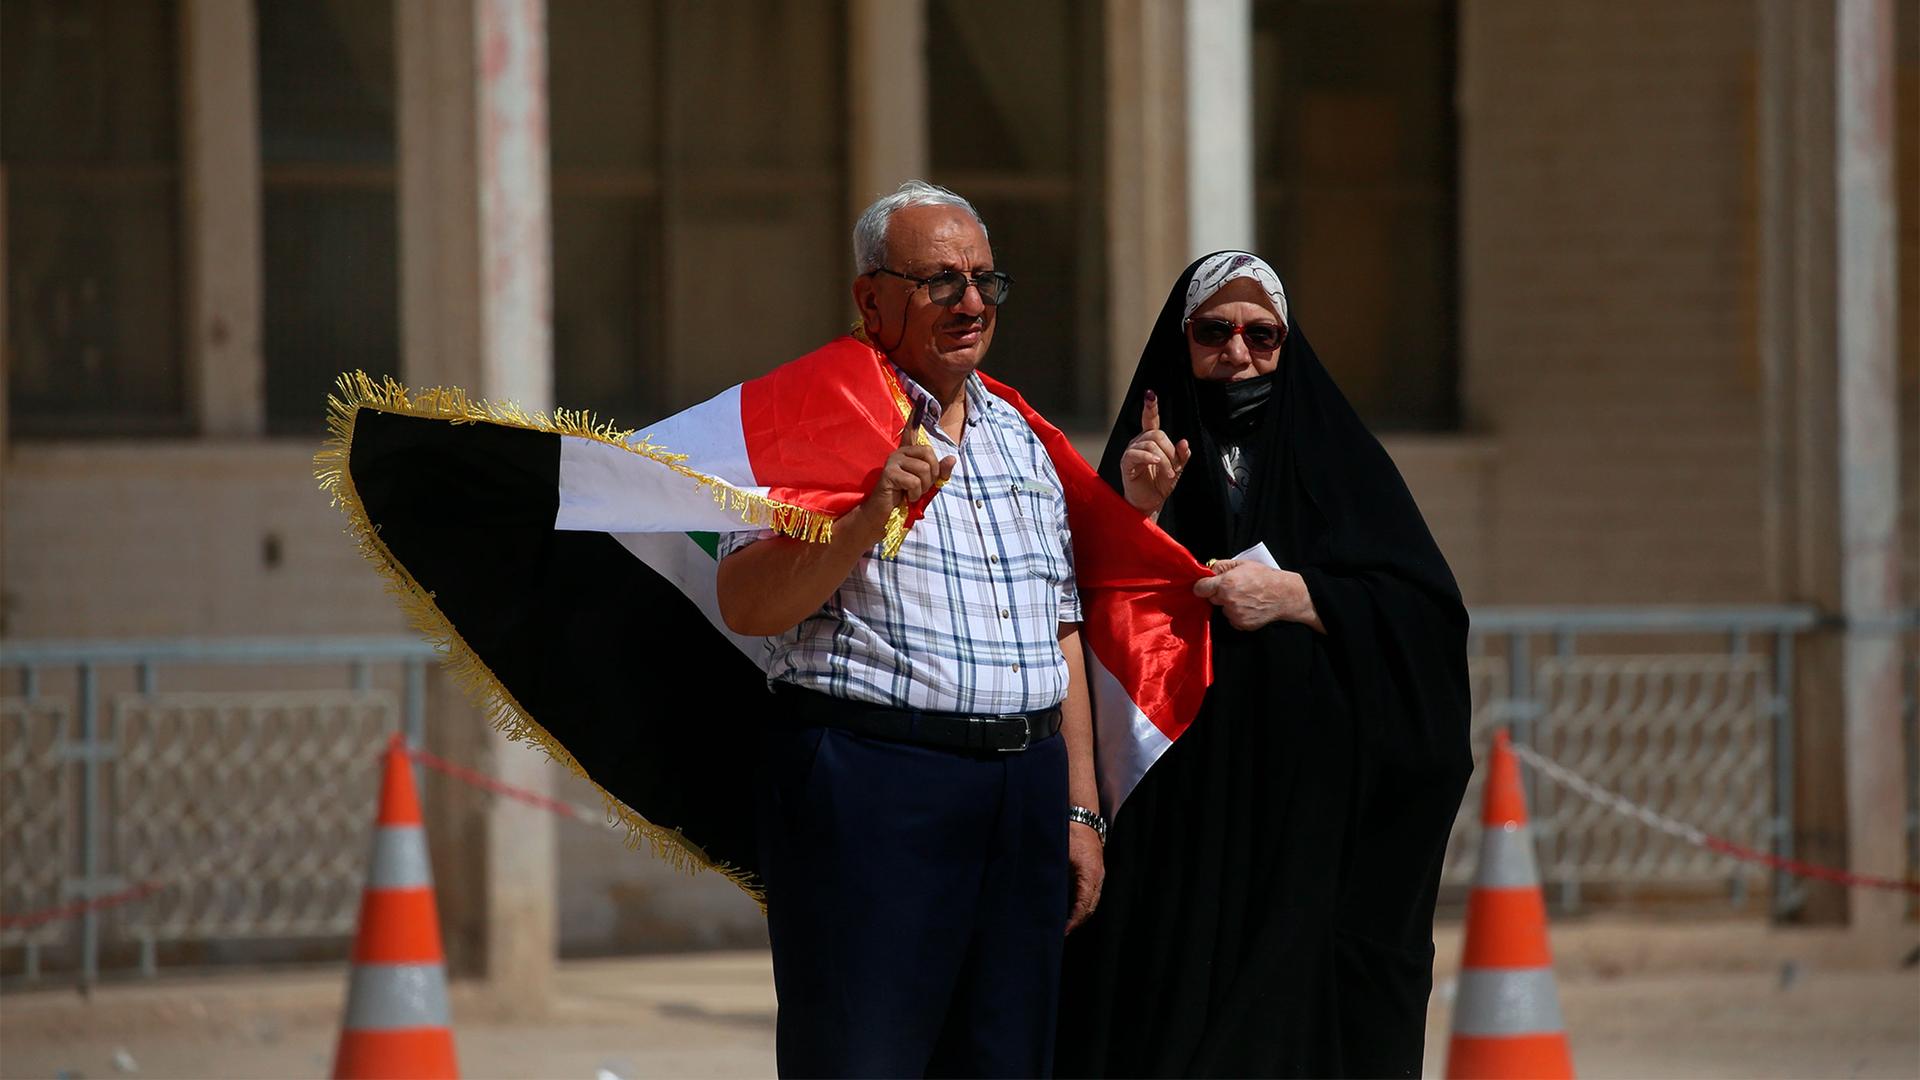 A man and his wife show their ink-marked fingers after casting their votes inside a polling station in the country's parliamentary elections in Najaf, Iraq